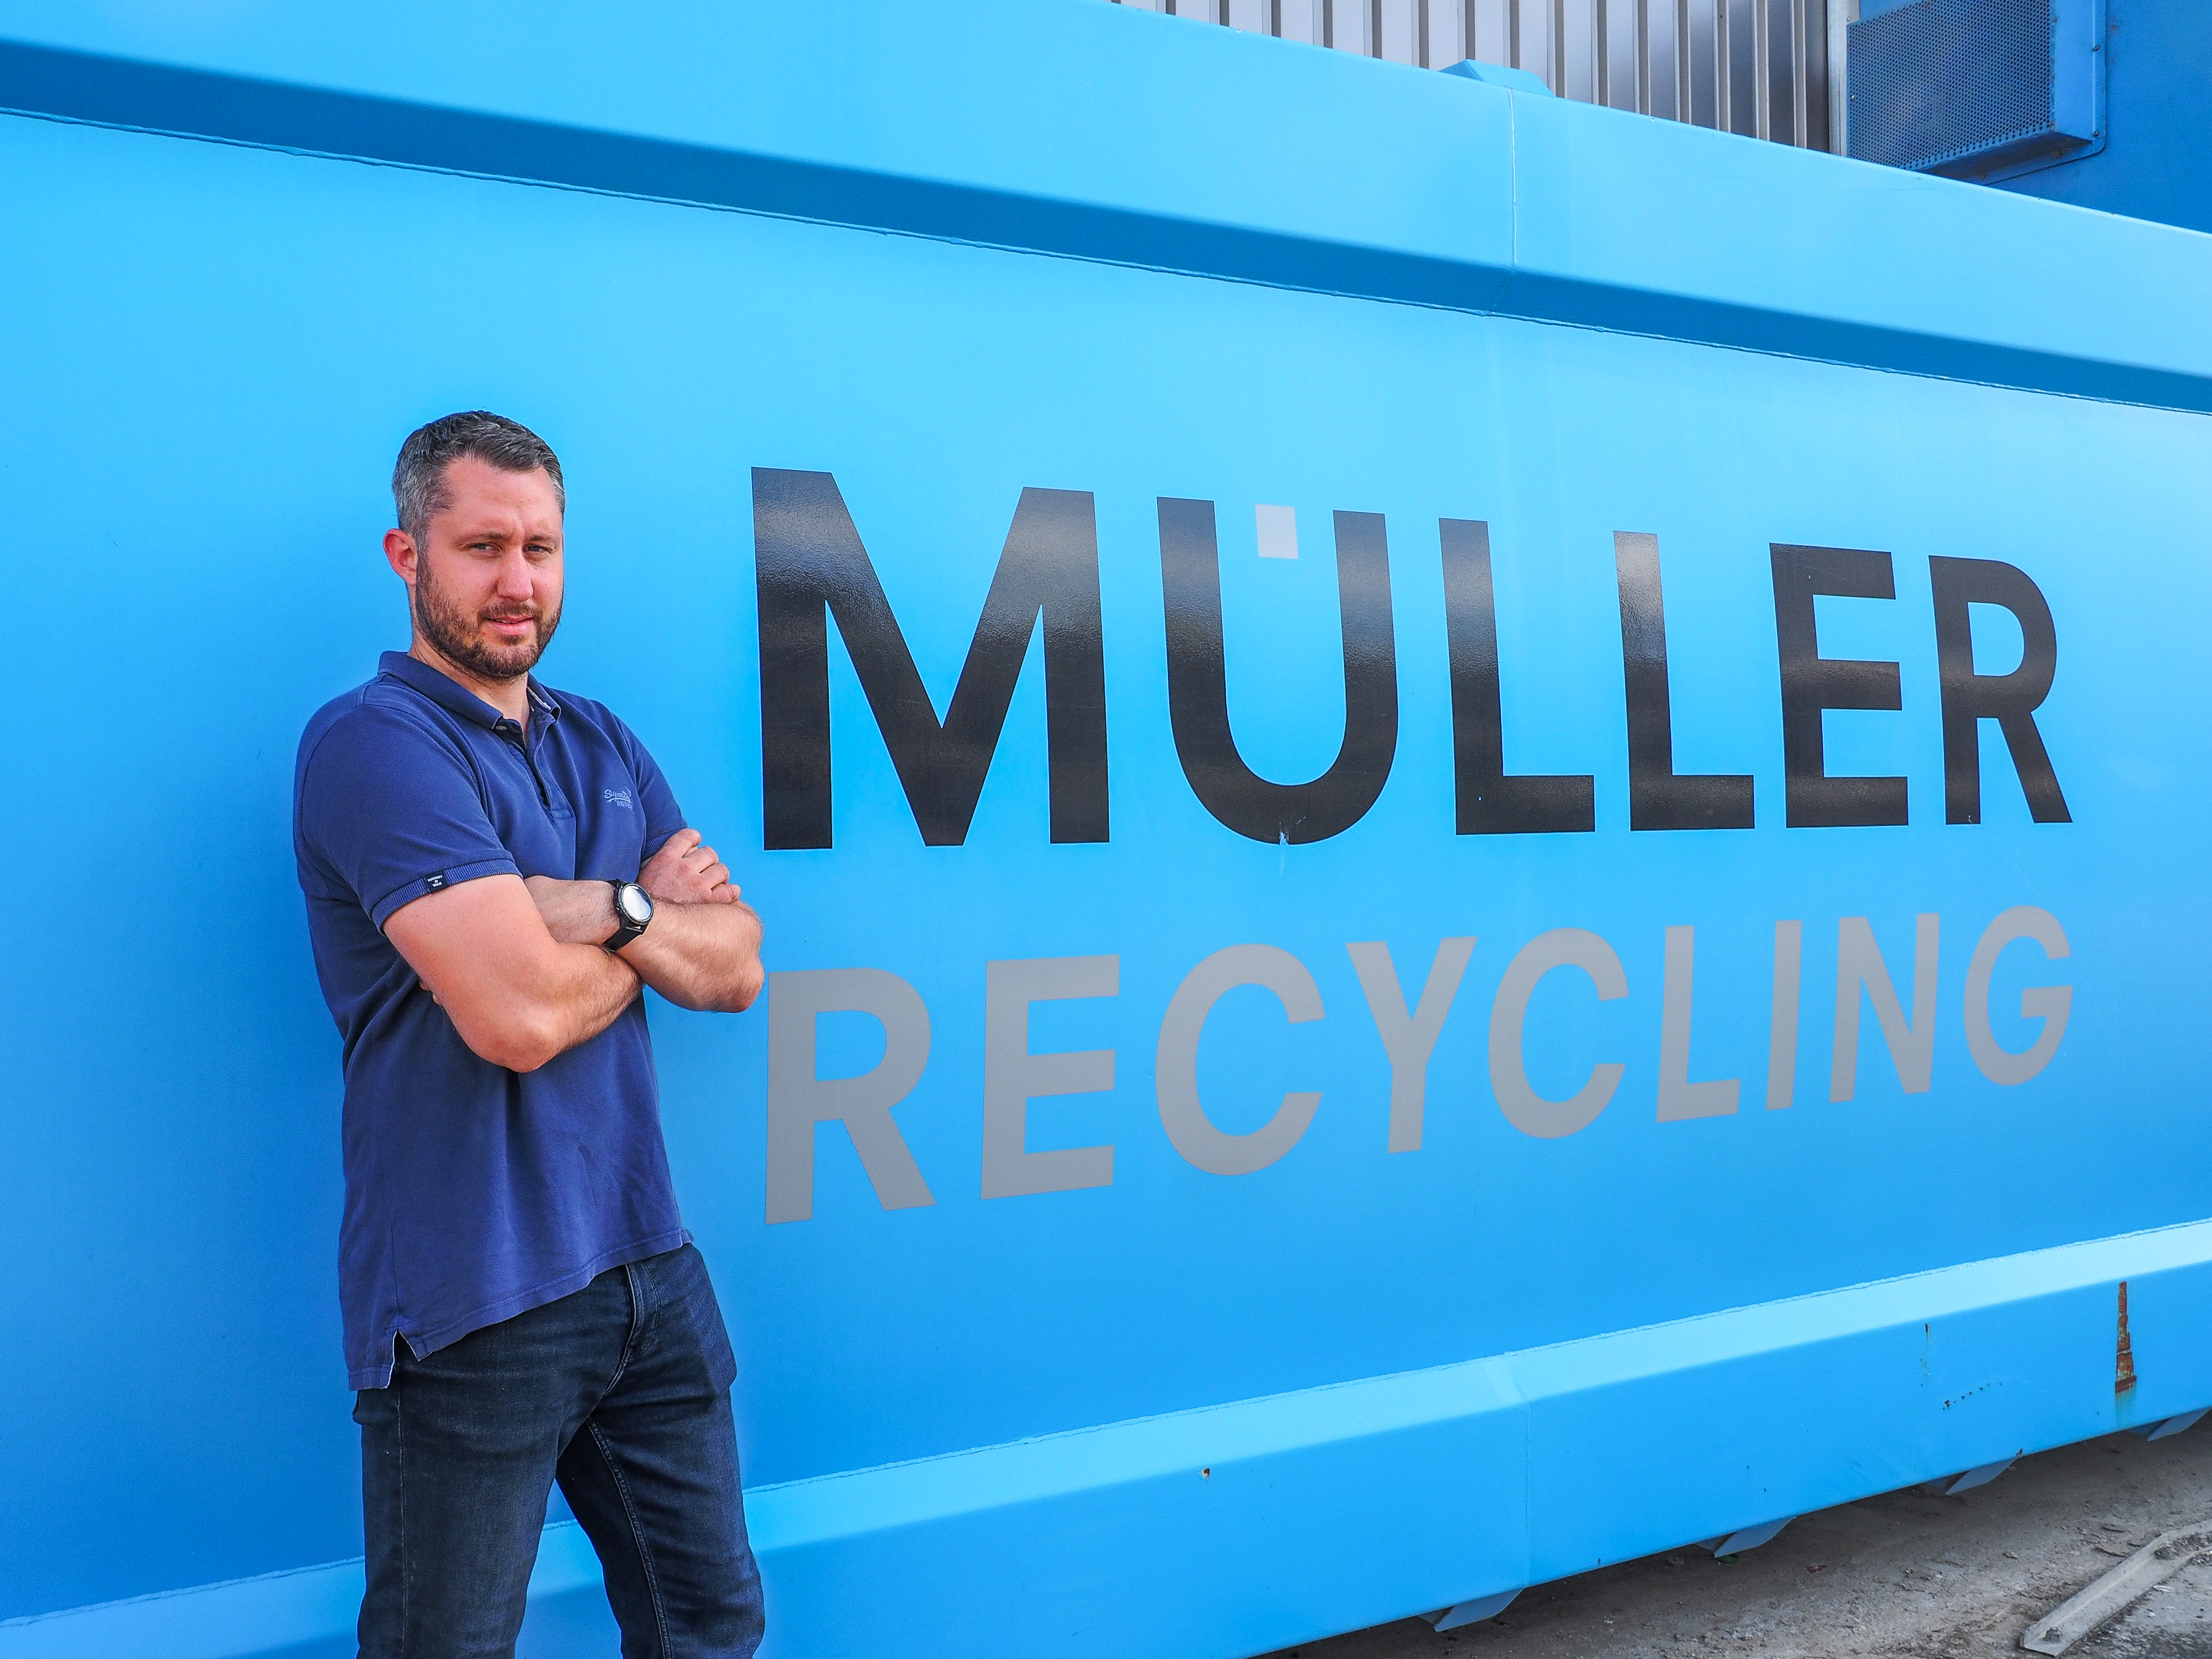 Thomas Müller is the third generation of this family at the helm of Müller Recycling. © Müller Recycling AG